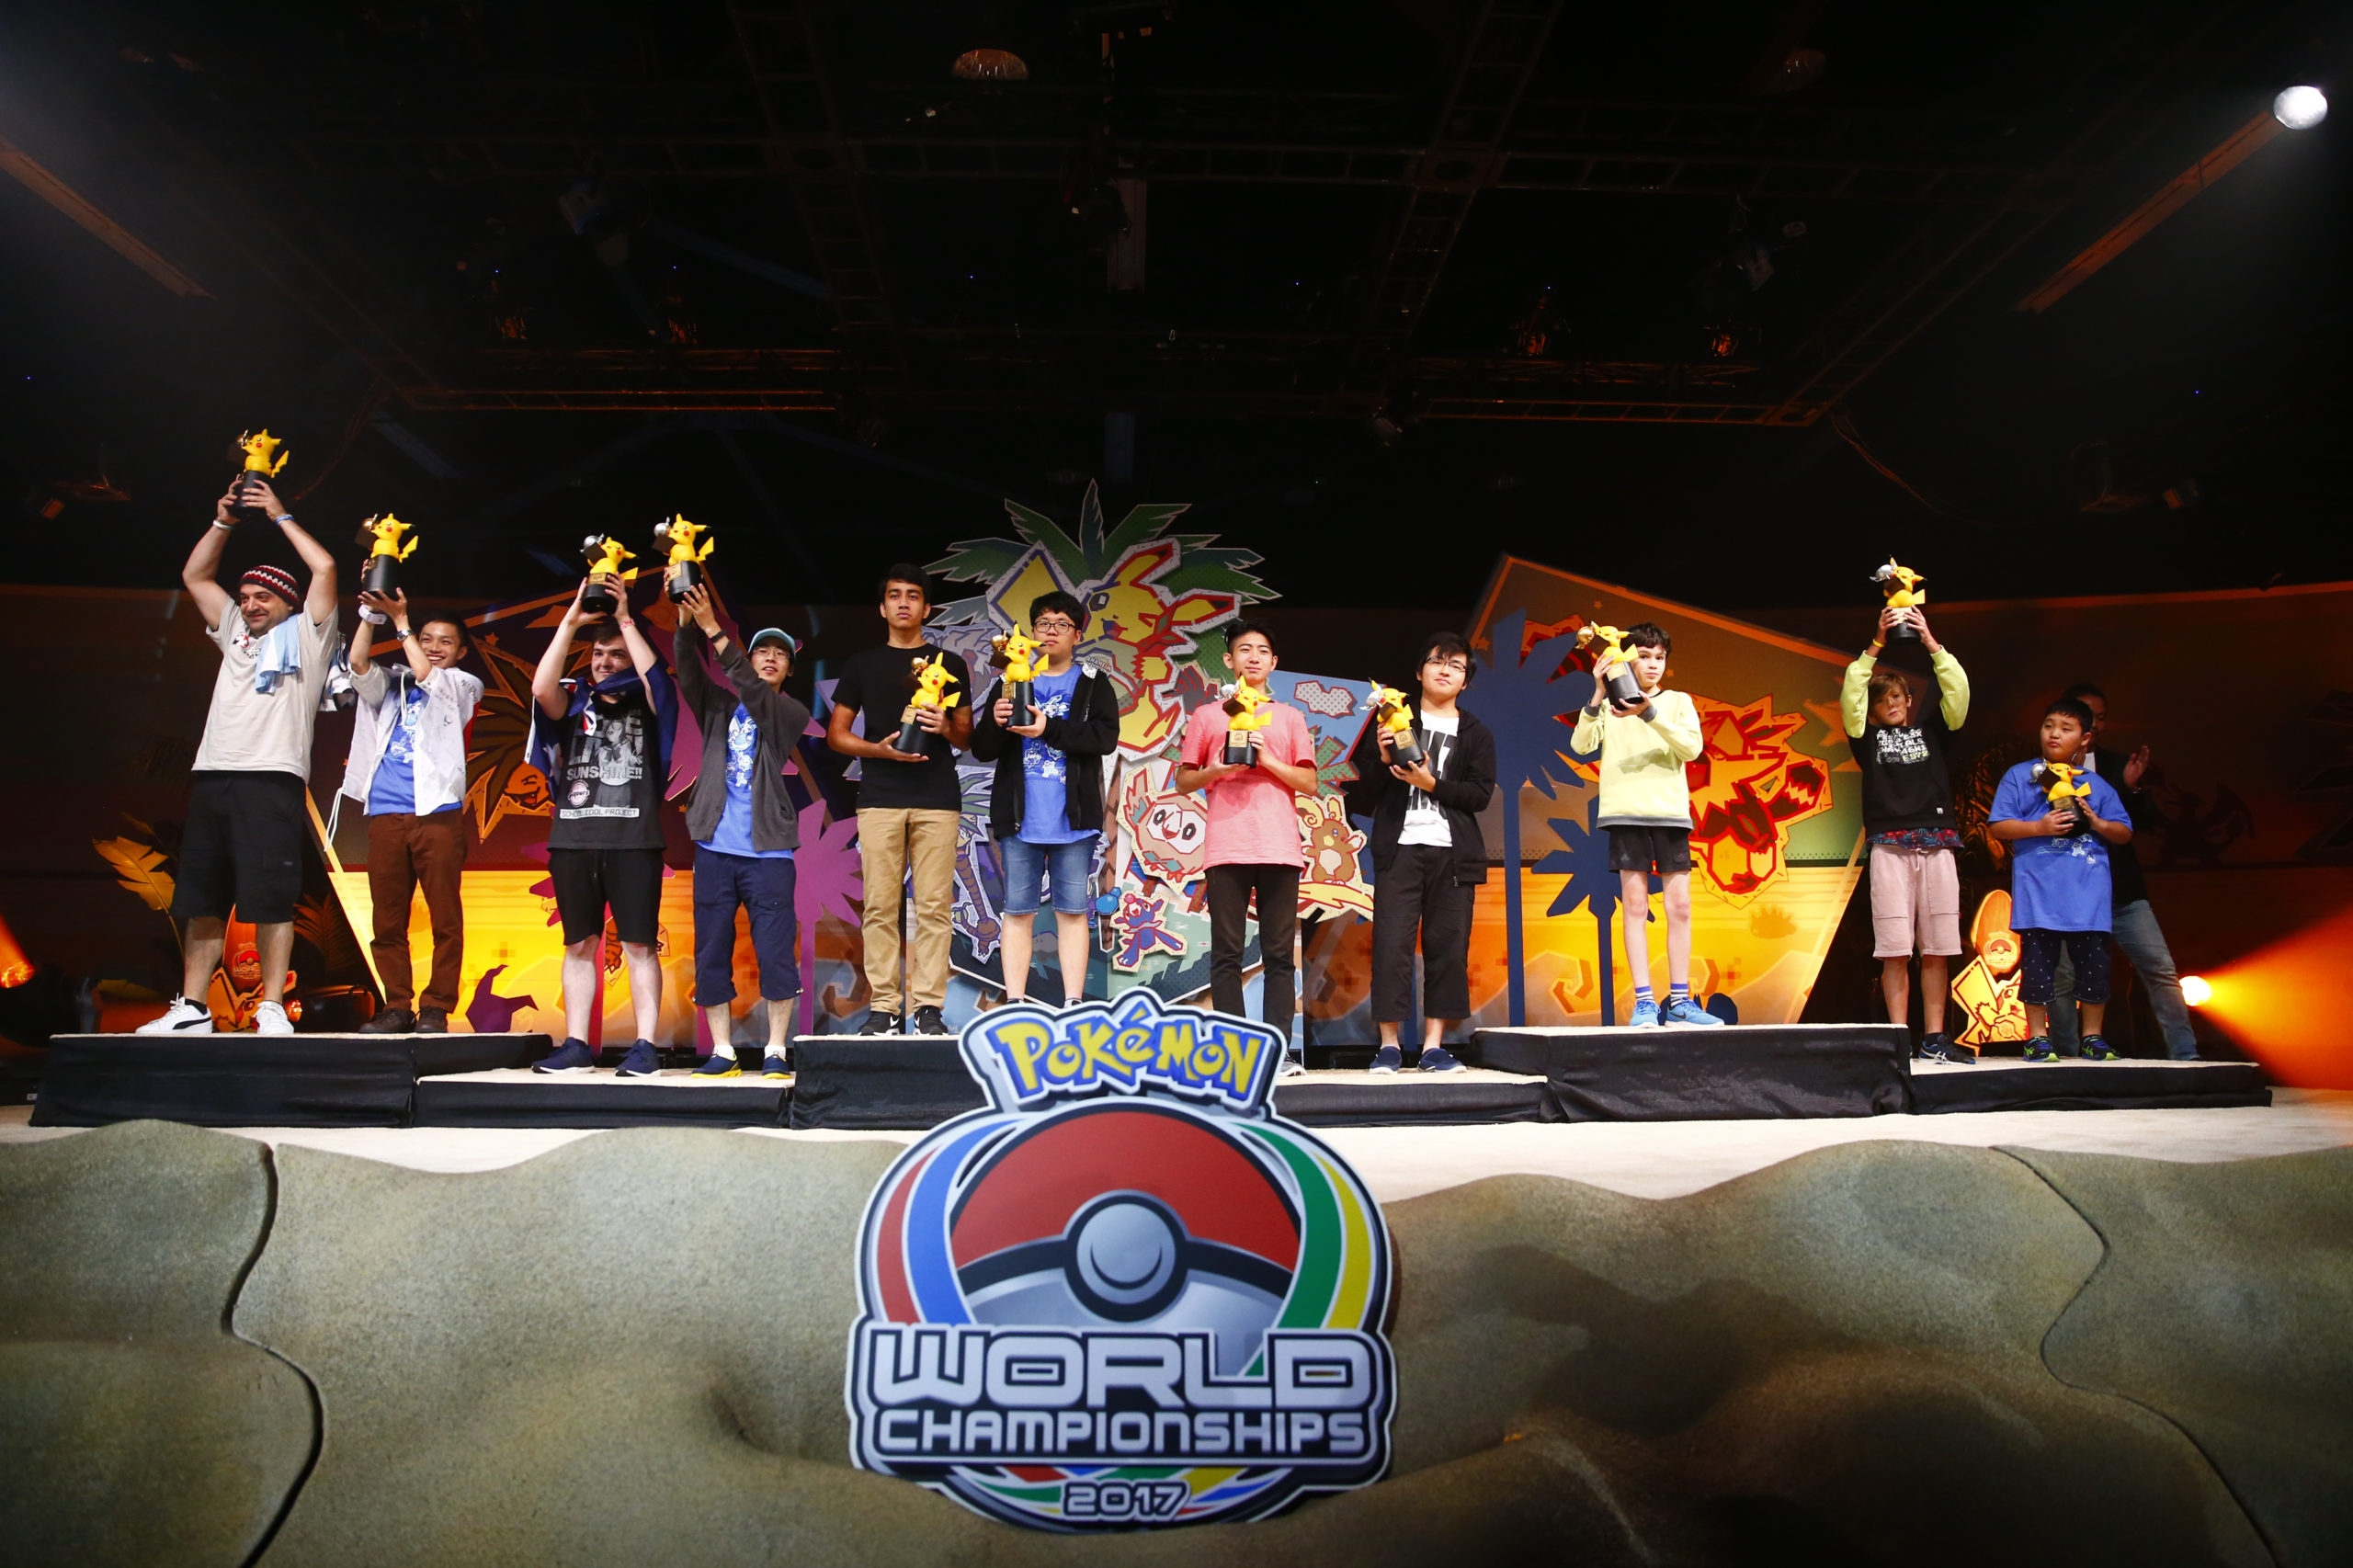 Japan Defeats Australia To Win One Of The Closest Pokemon Championships In History